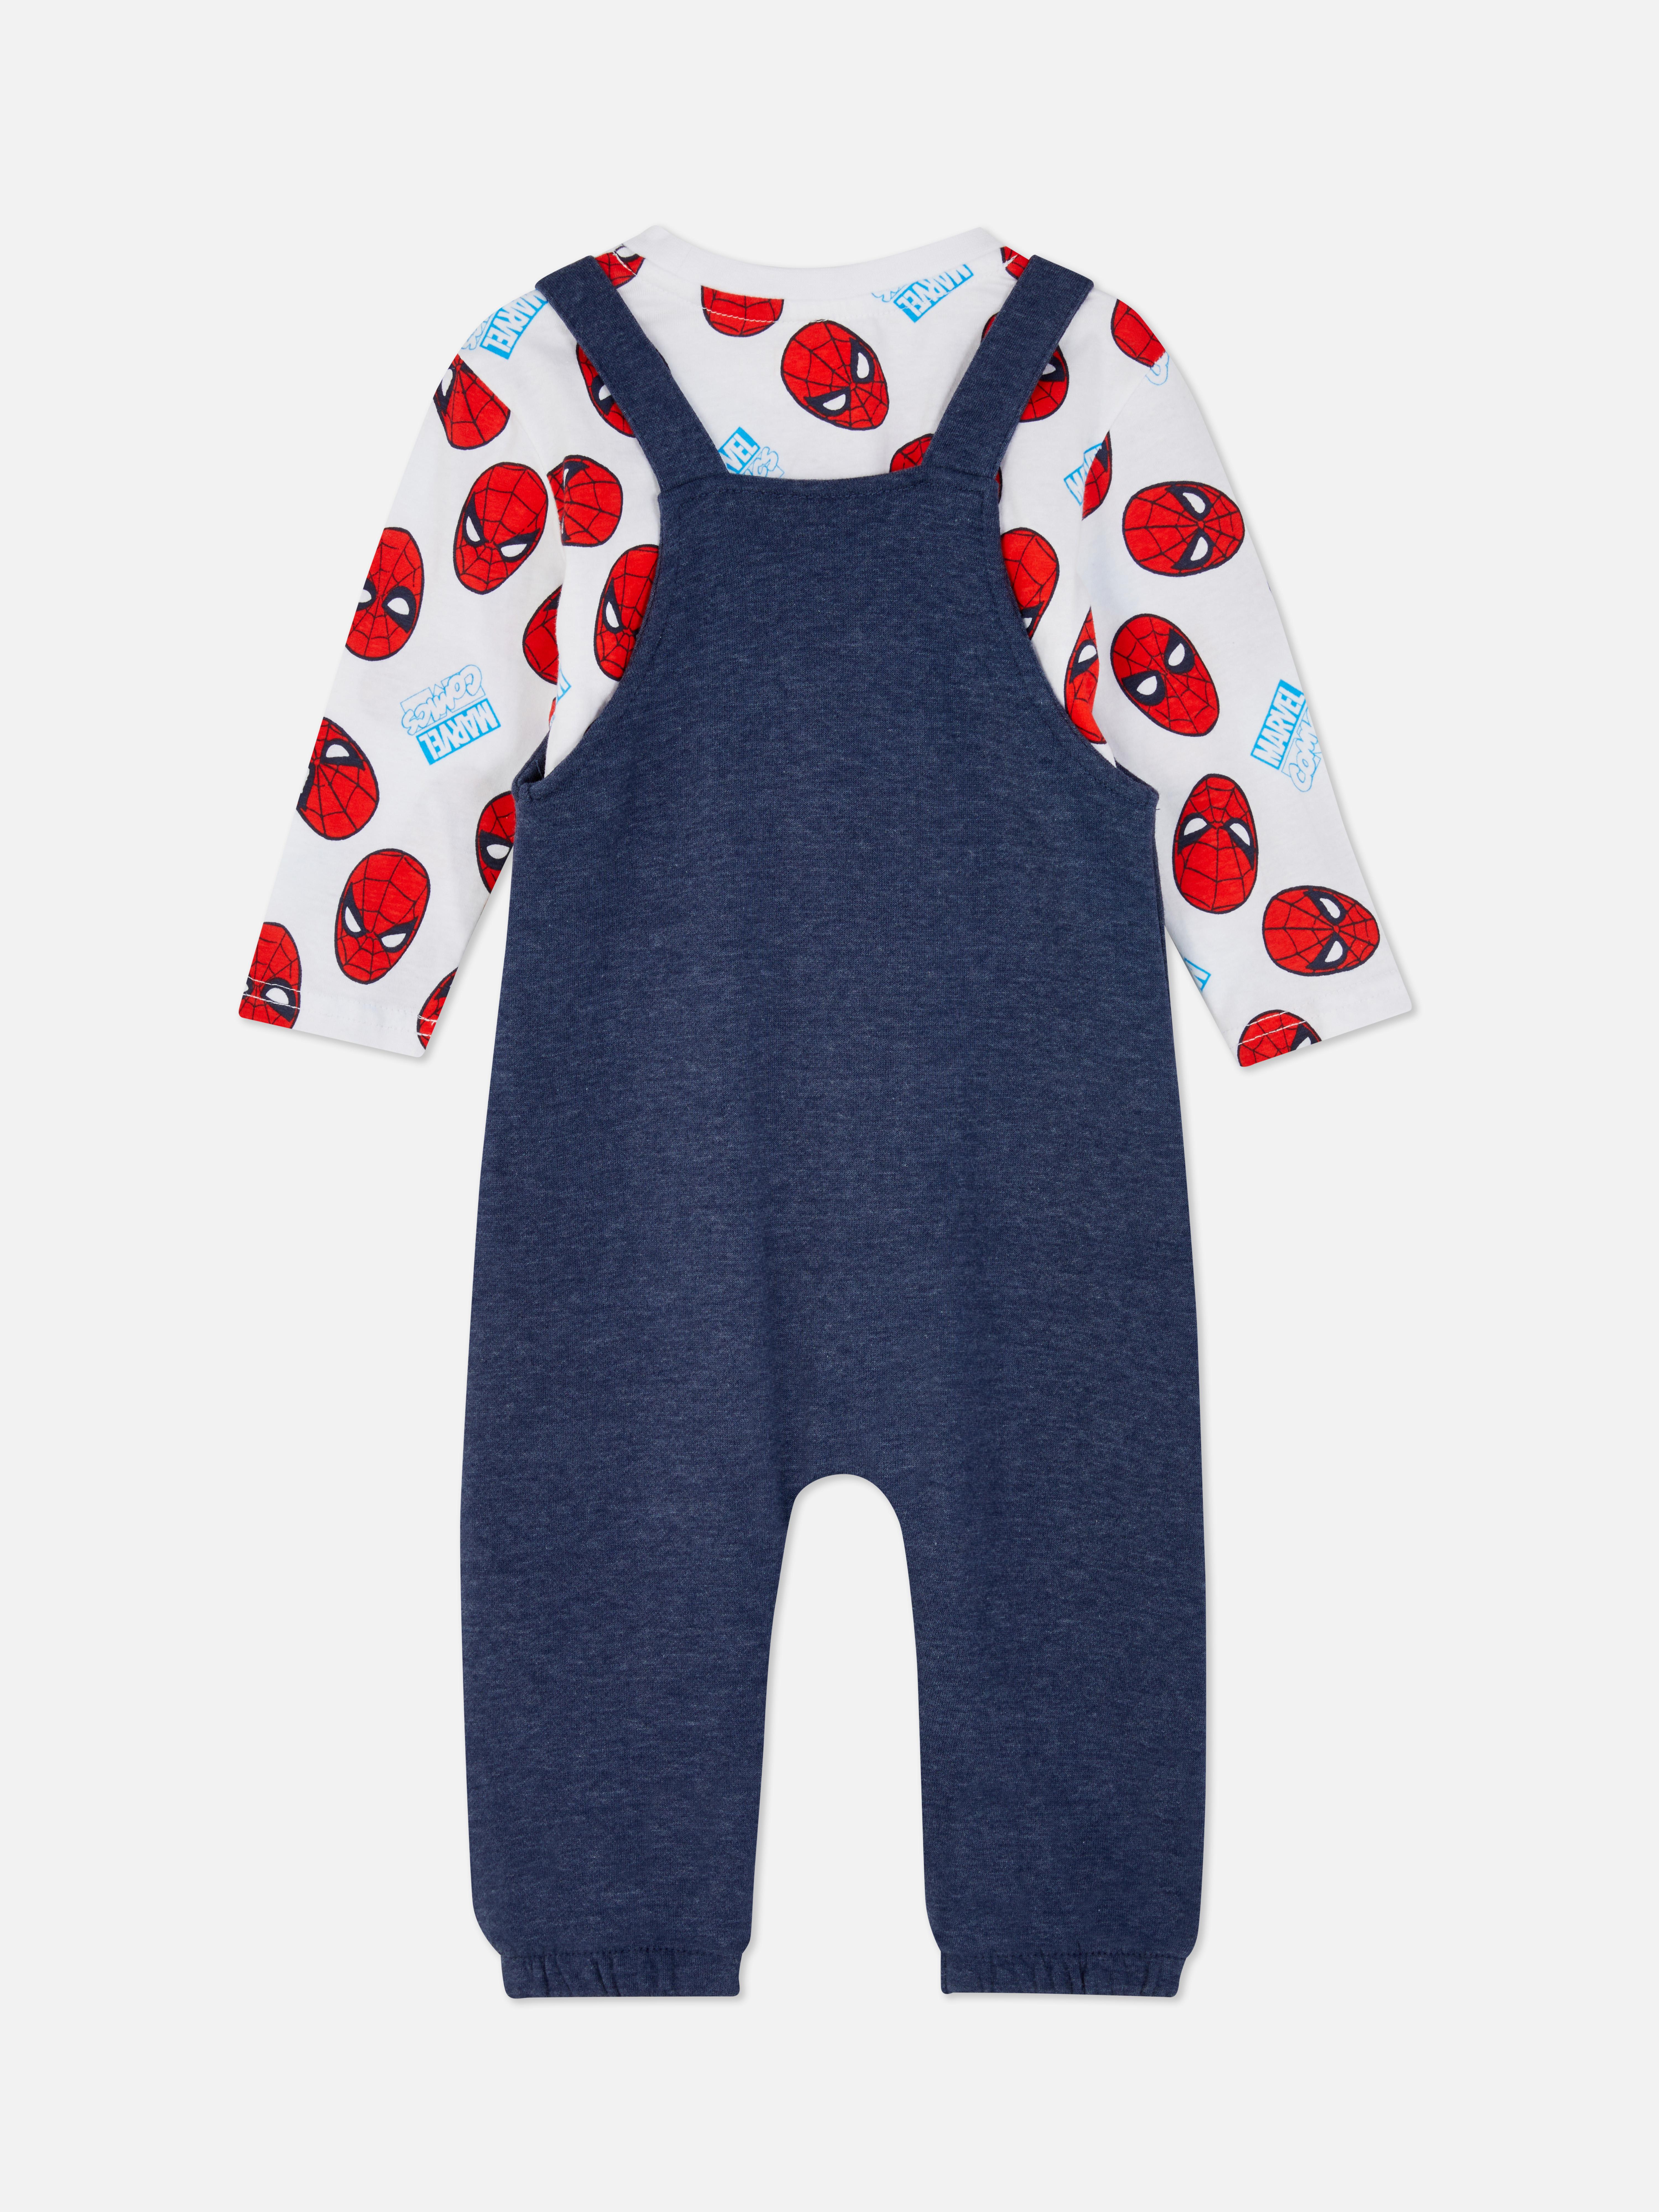 Marvel Spider-Man Two in One Dungarees